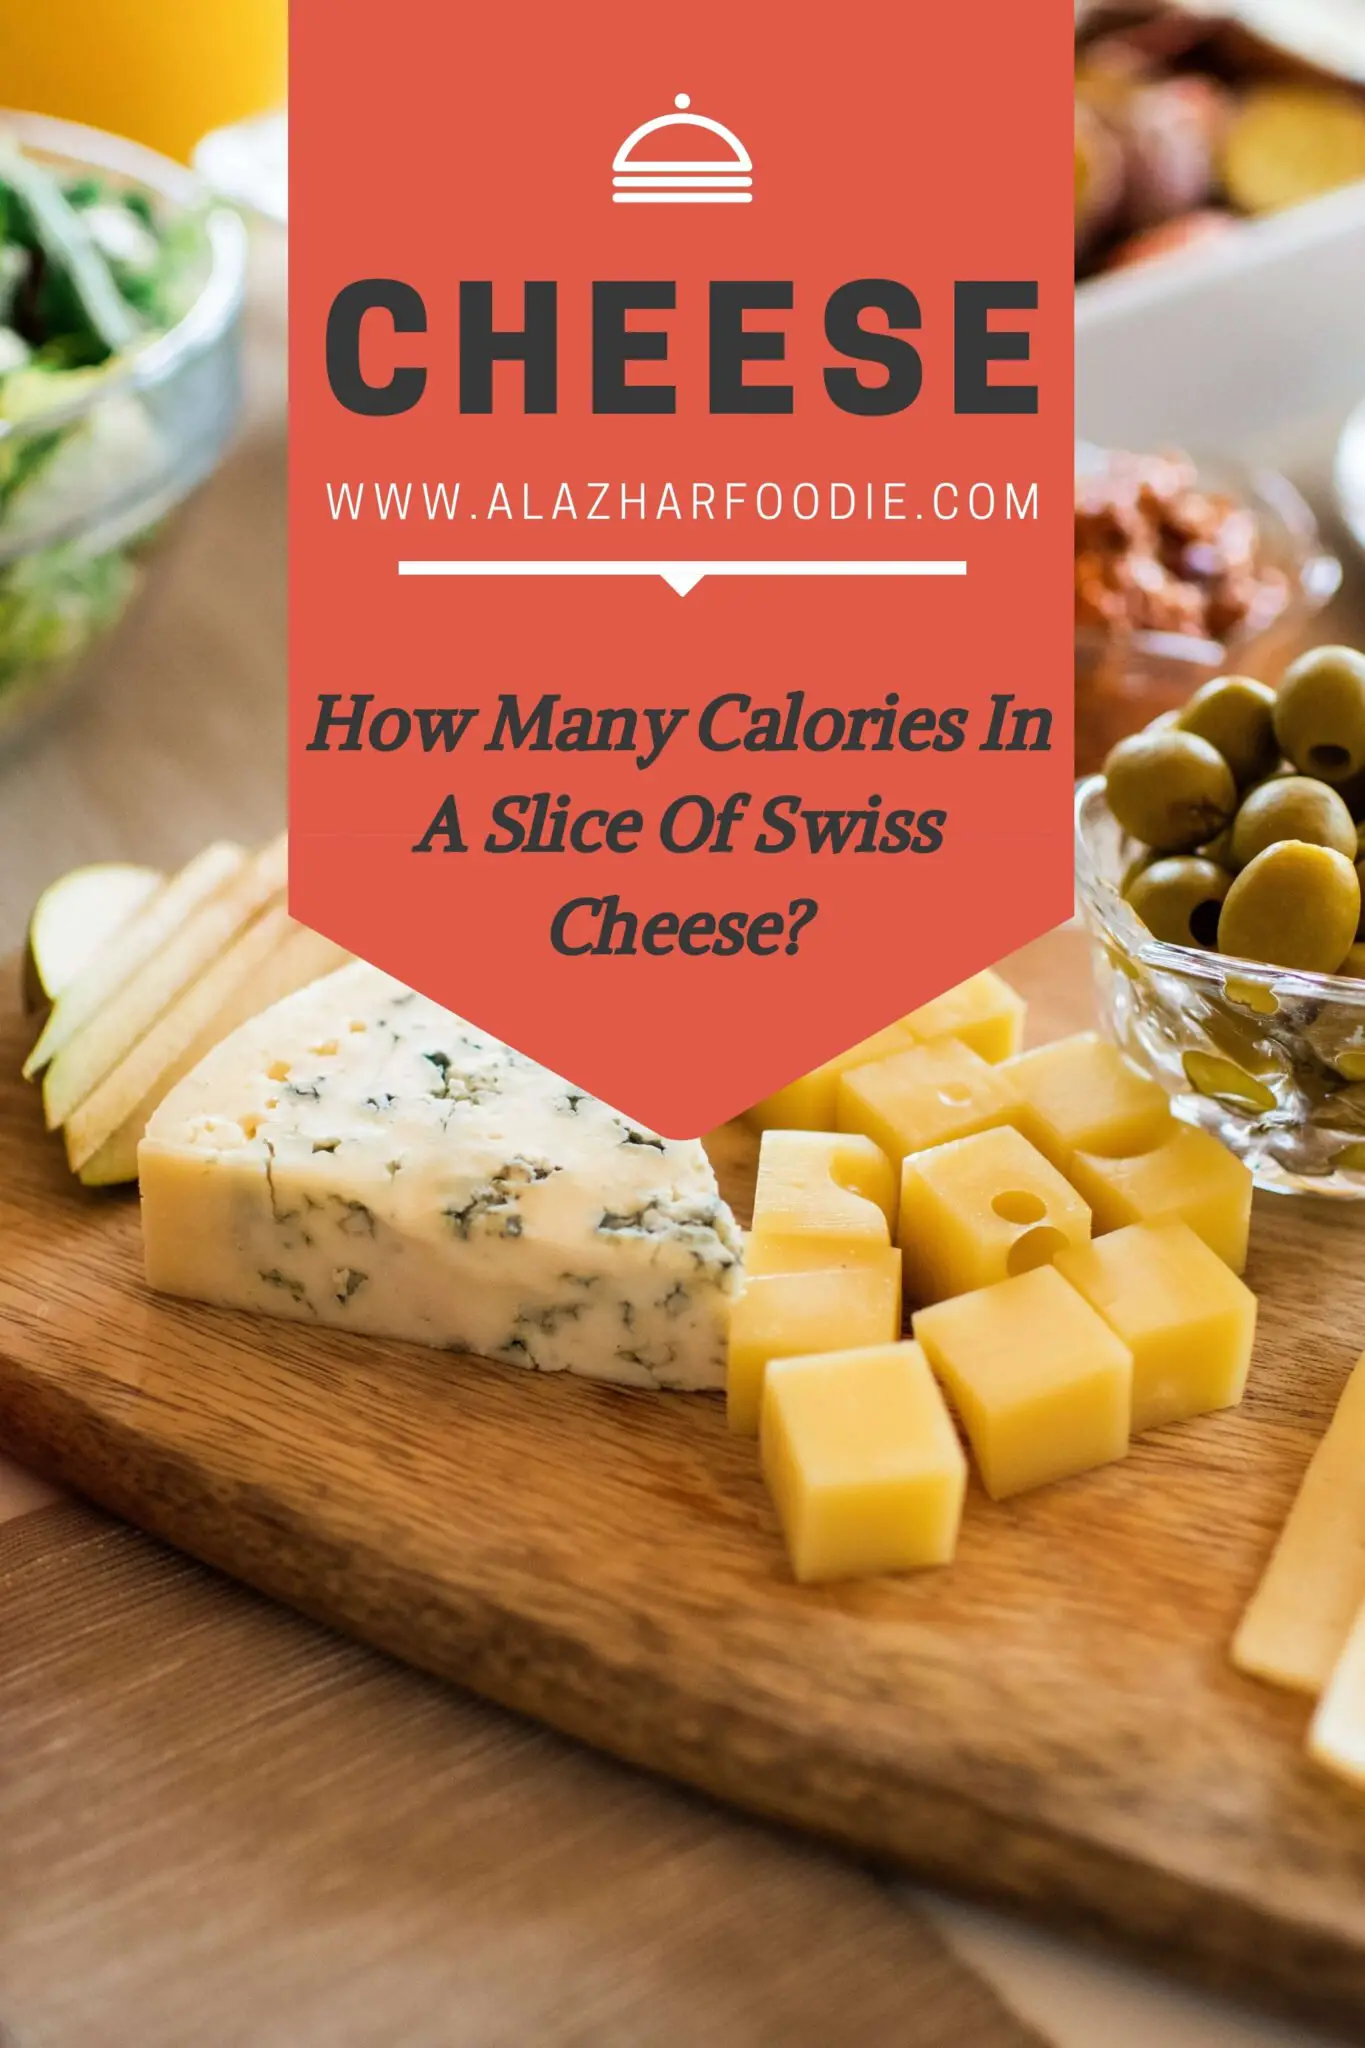 How Many Calories In A Slice Of Swiss Cheese? » Al Azhar Foodie